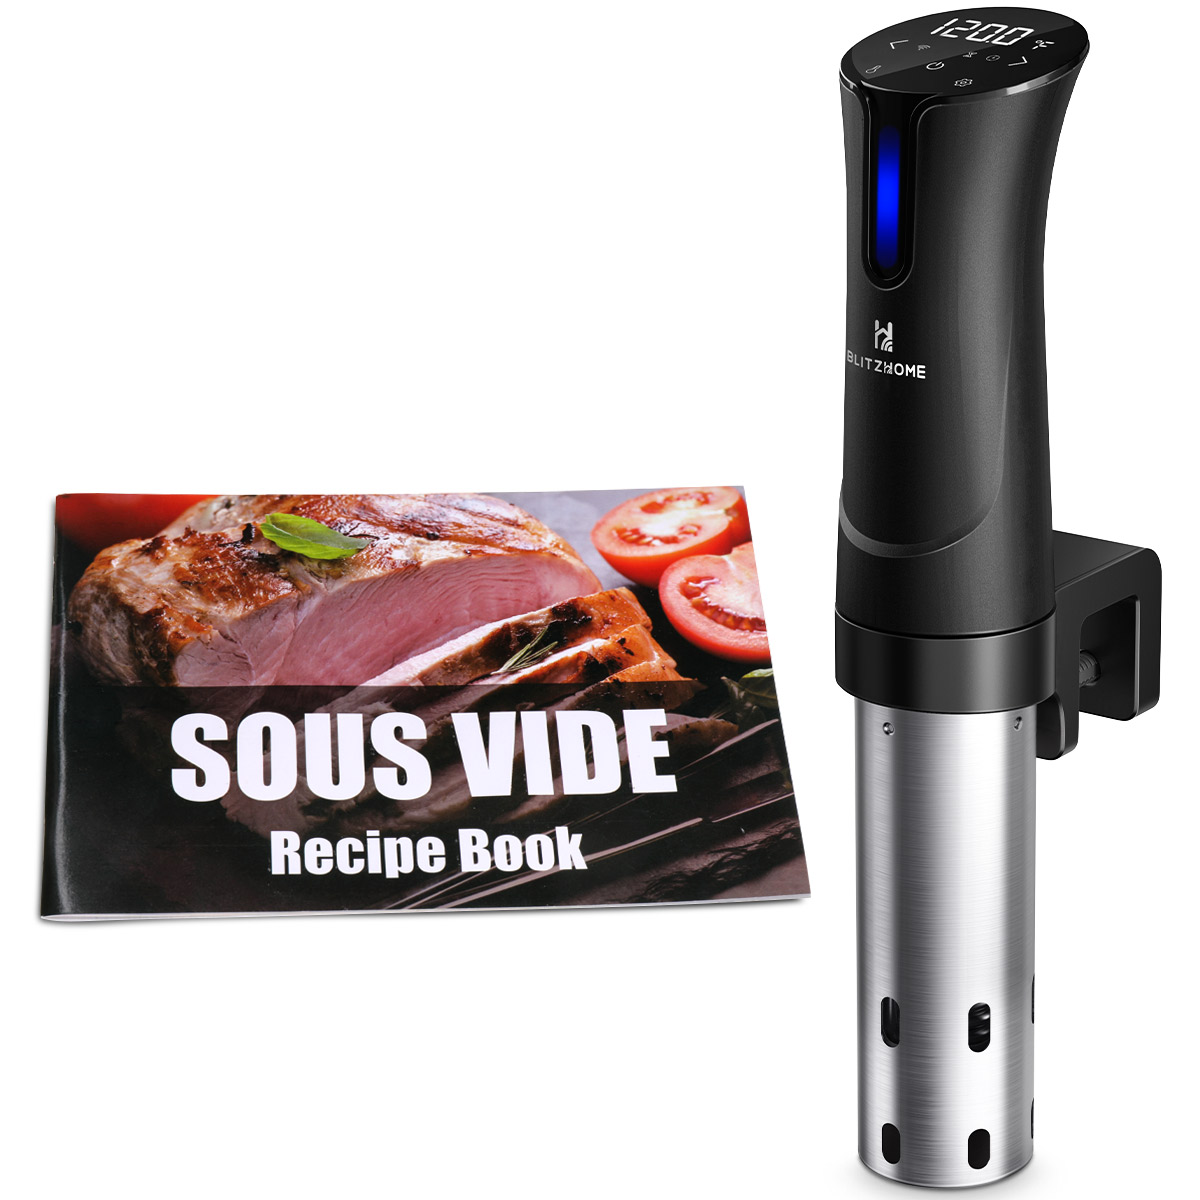 BlitzHome SV2209 1100W Sous Vide Cooker APP Control Thermal Immersion Circulator Machine with Digital LED Display Time and Temperature Control